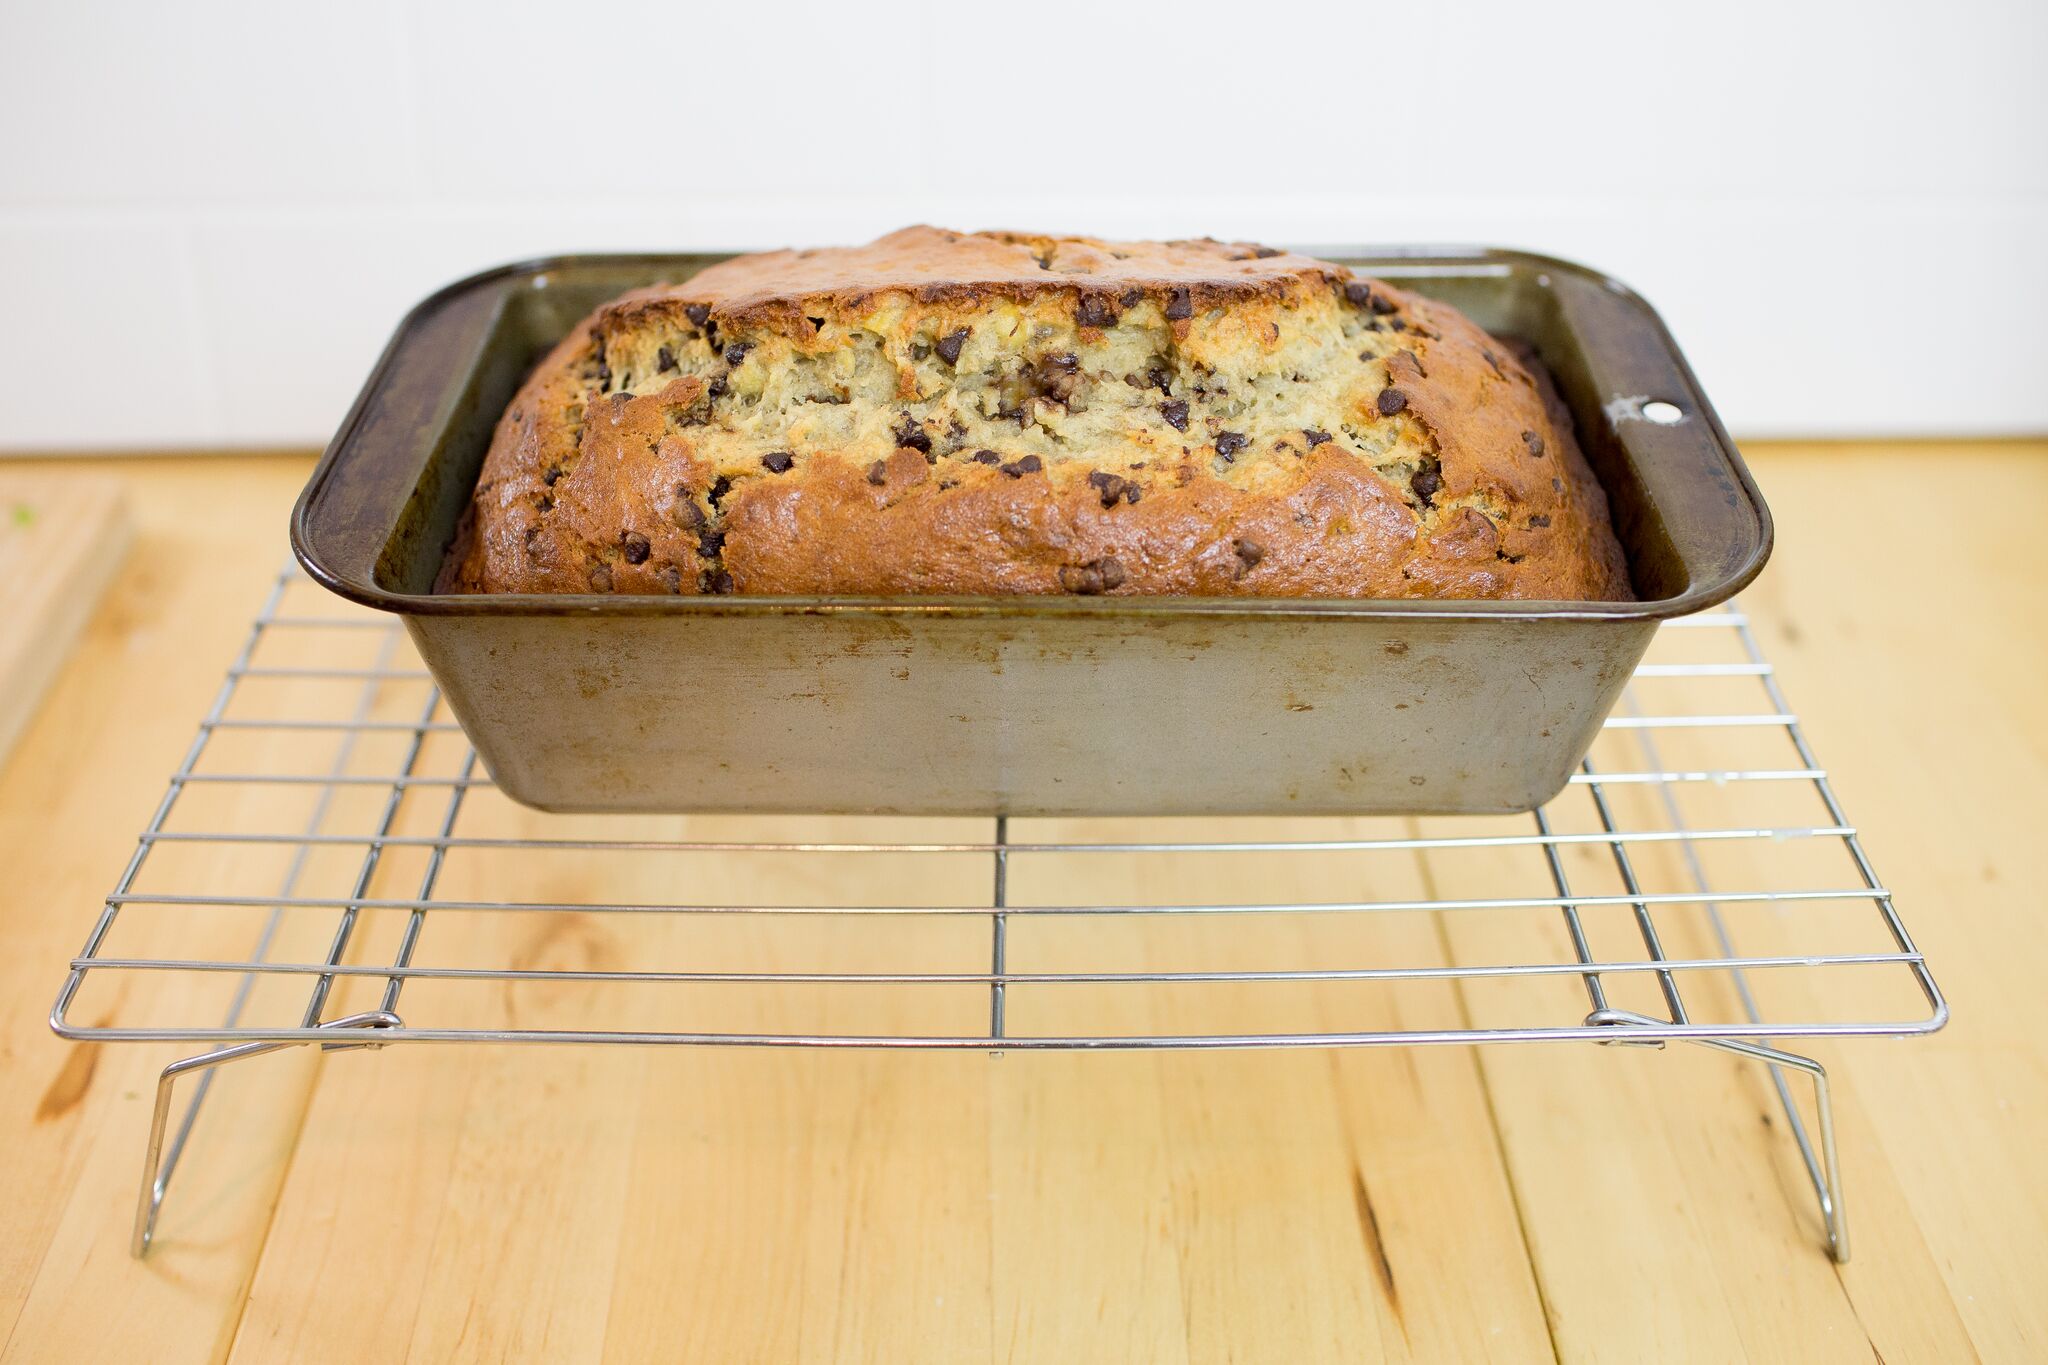 Allow the chocolate chip banana bread to cool on a wire rack